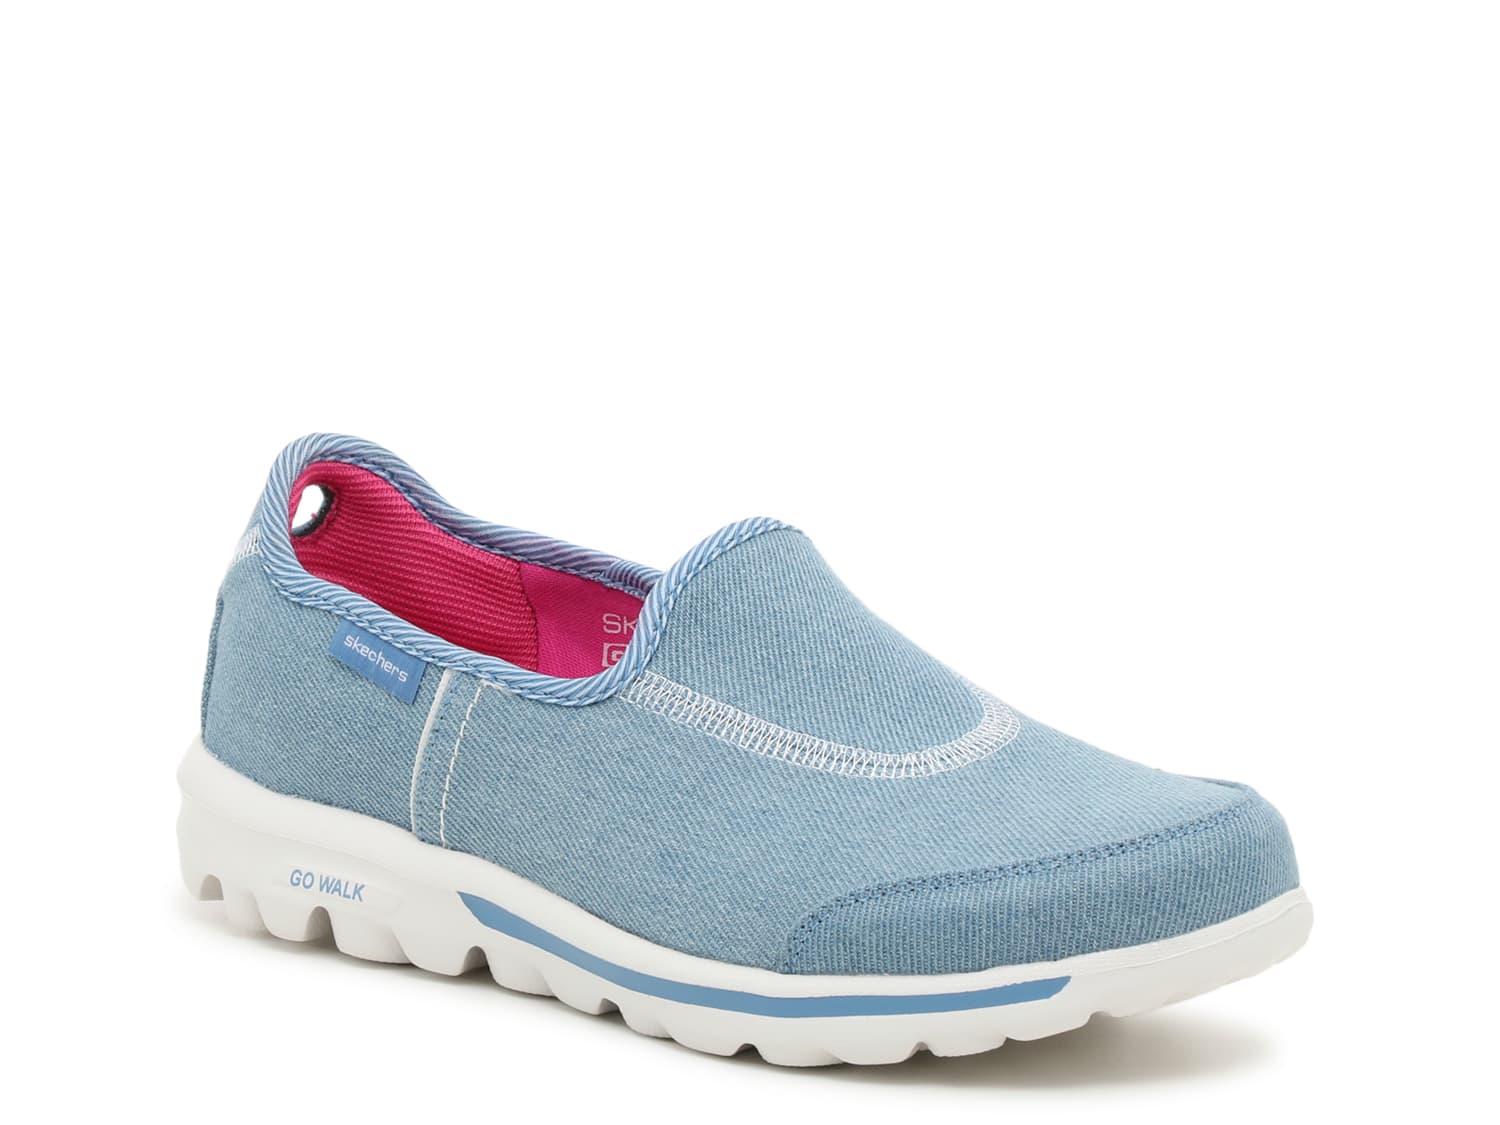 Shoes: Women's, Men's & Kids Shoes from Top Brands |